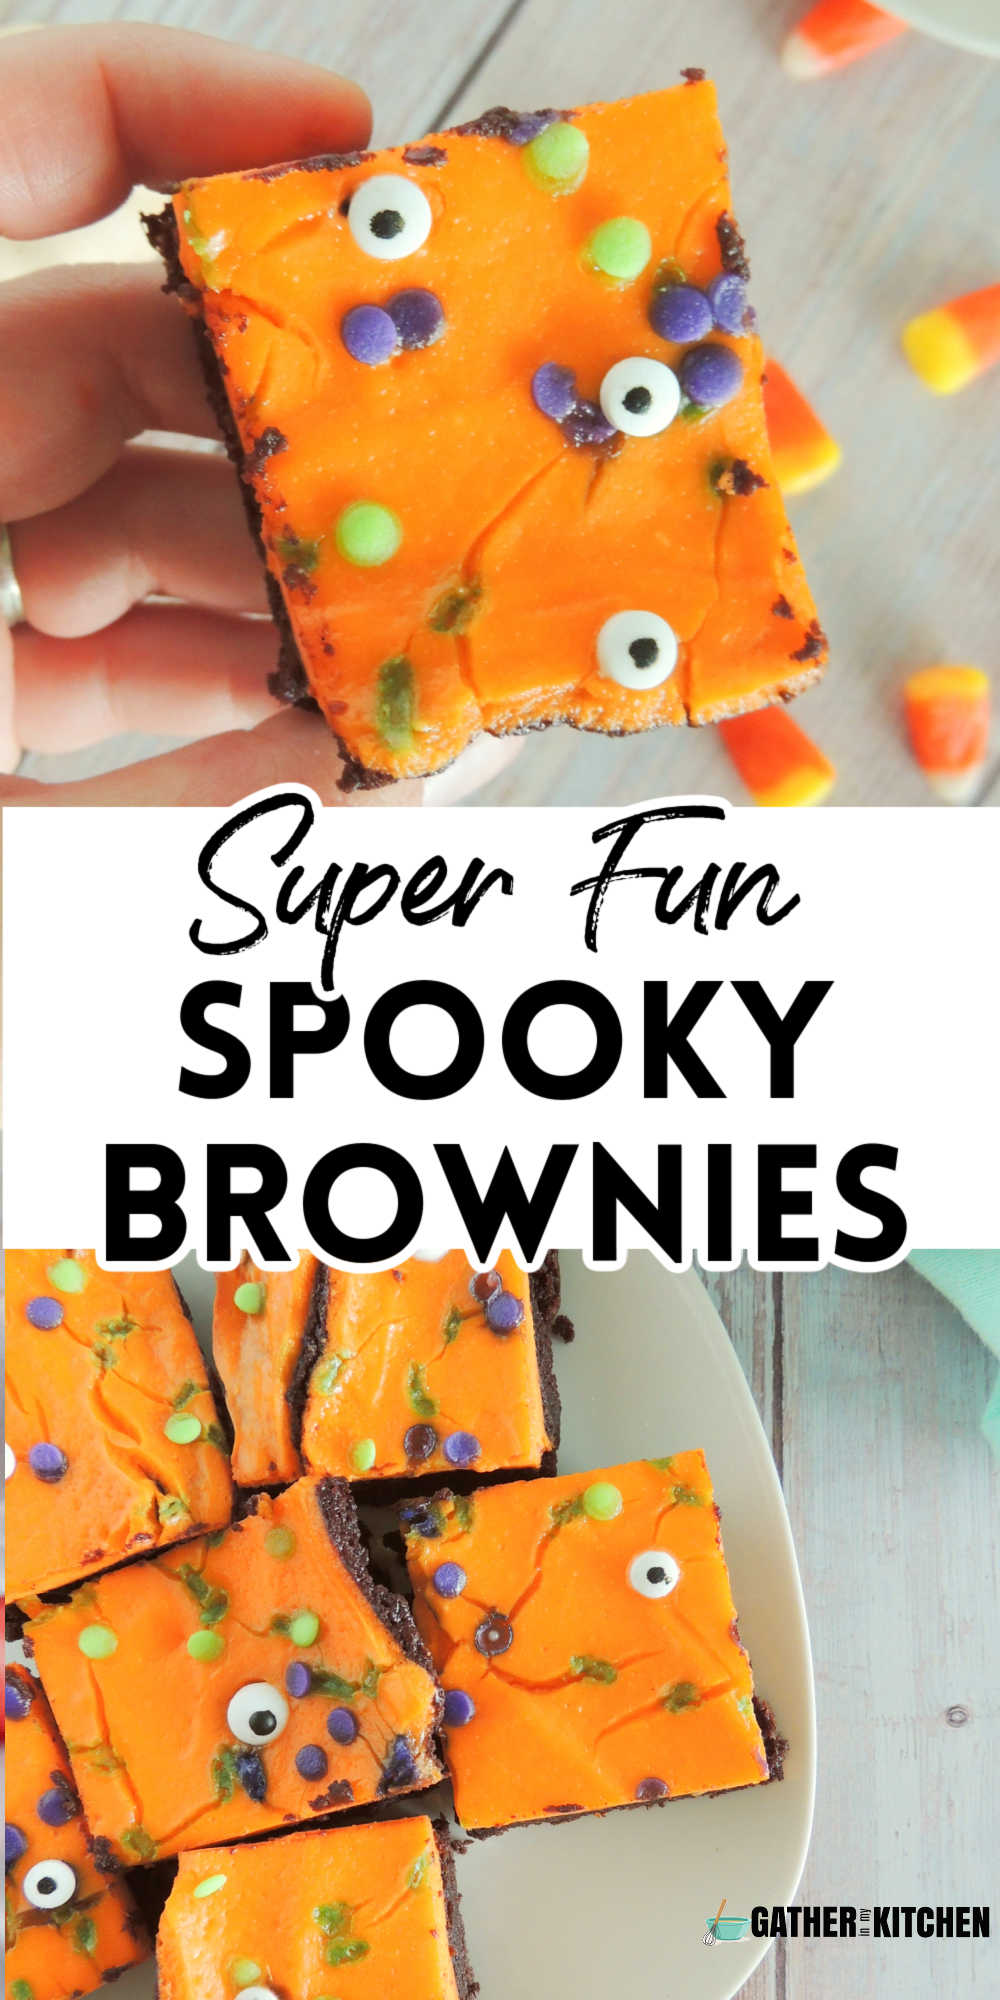 pin image: top is a Halloween brownie held by someone, middle says "Super Fun Spooky Brownies" and bottom is a plate of Halloween brownies.